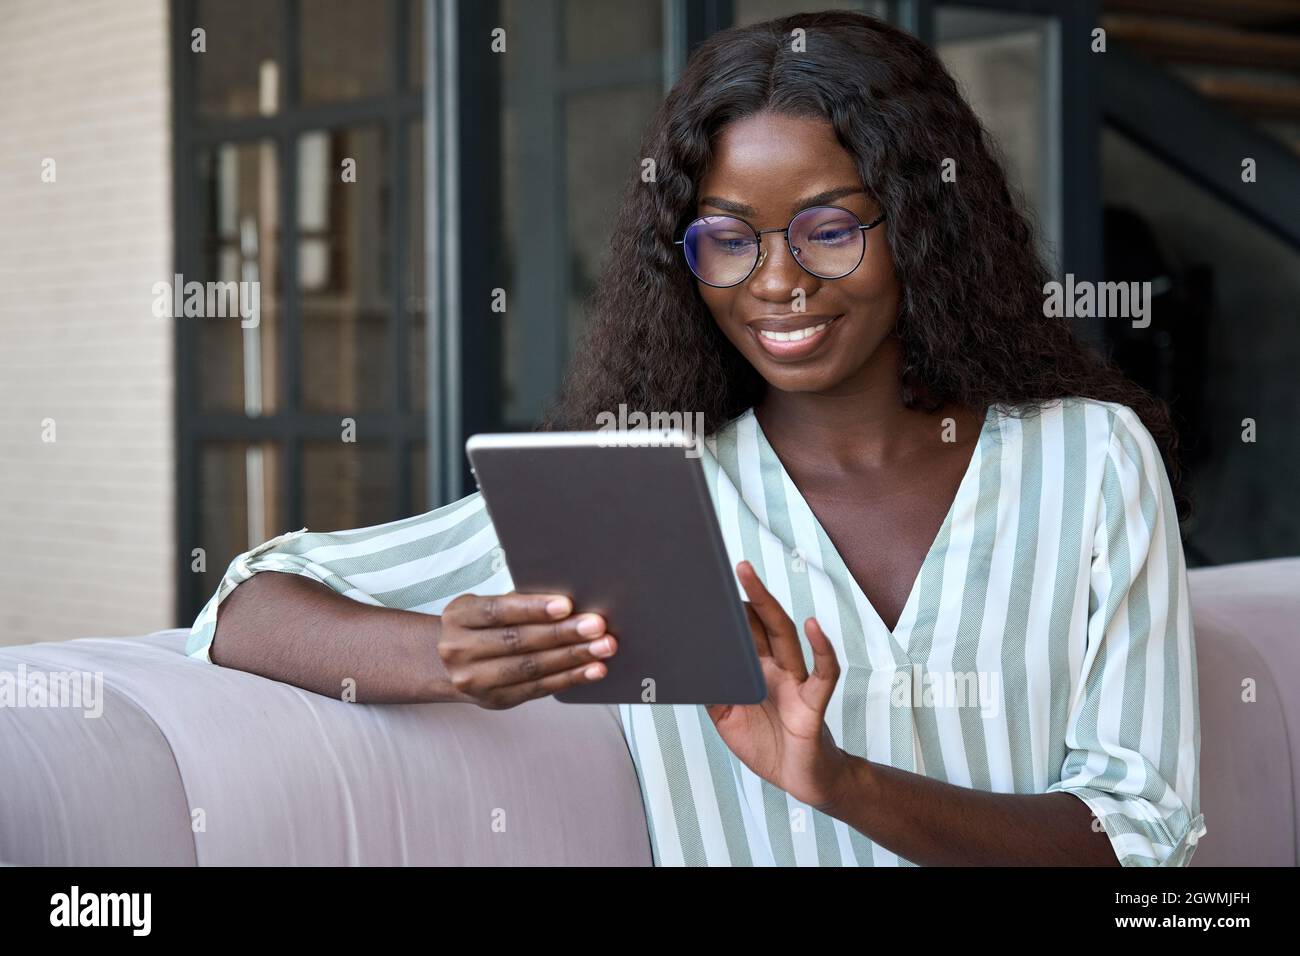 Afro American smiling young girl sitting on sofa at home holding tablet device. Stock Photo